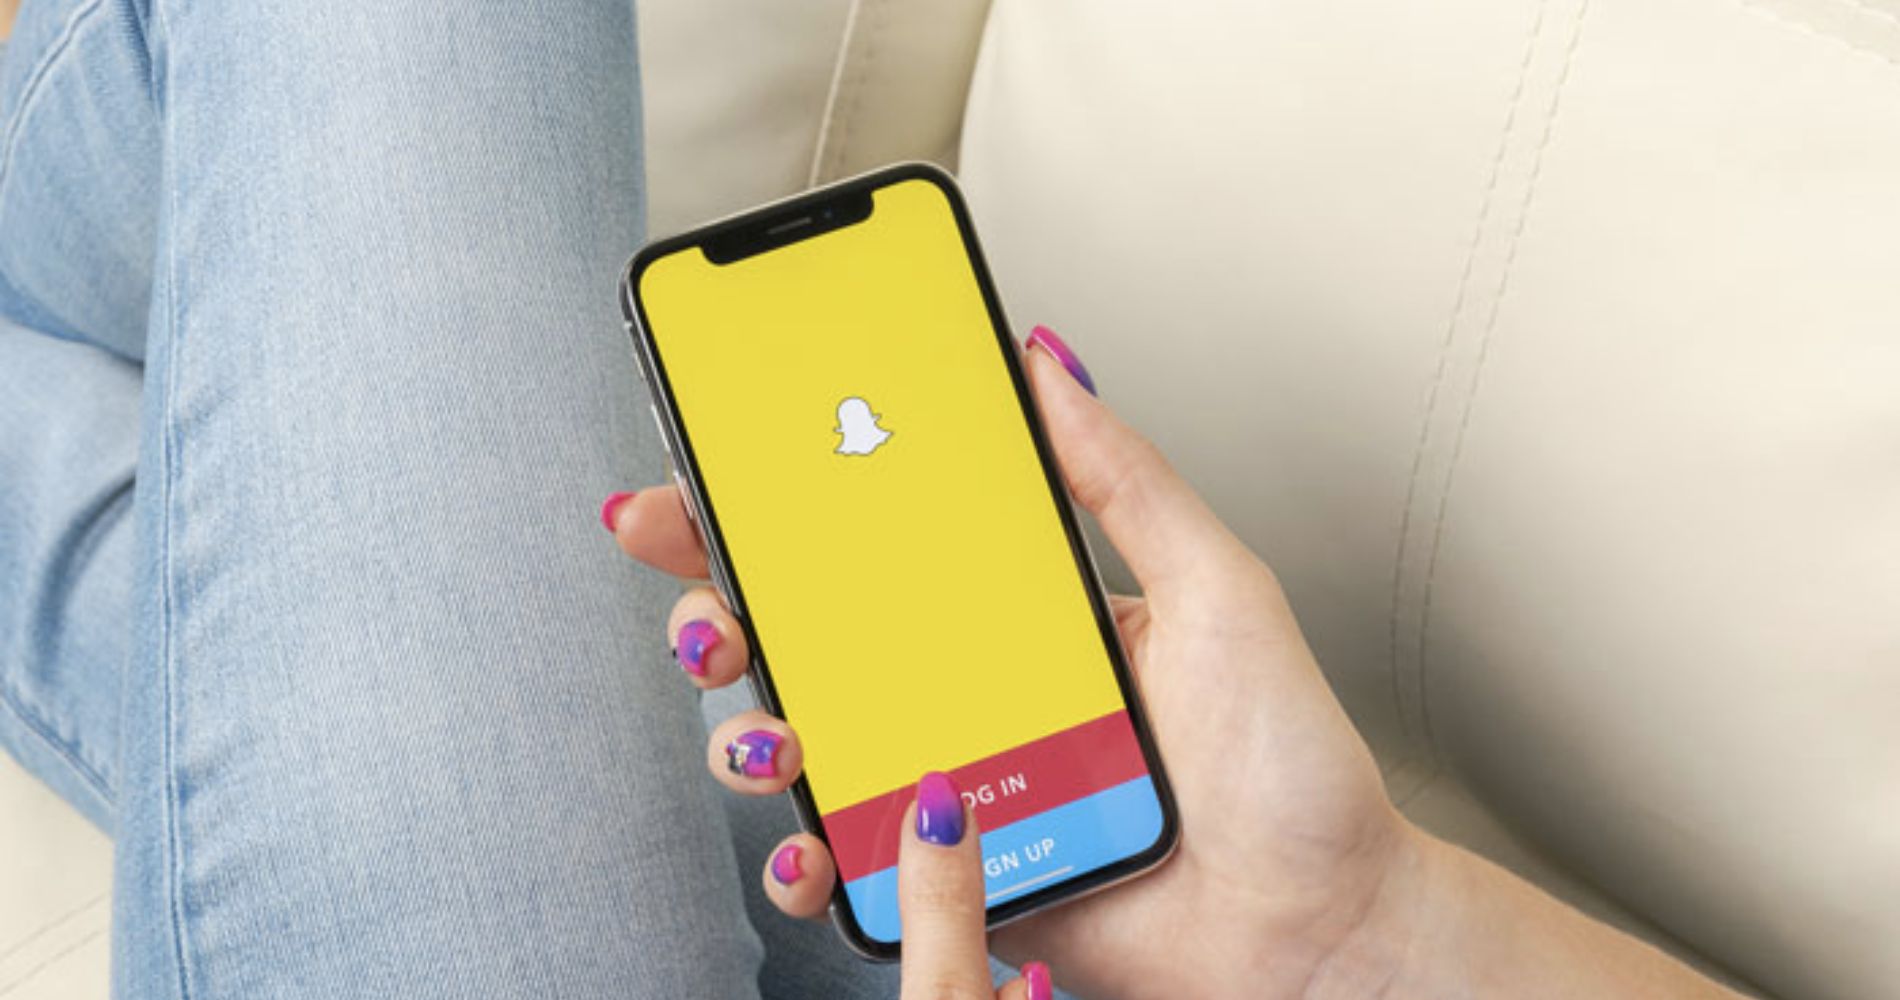 DistroKid teamed up with Snapchat will pay monthly to independent